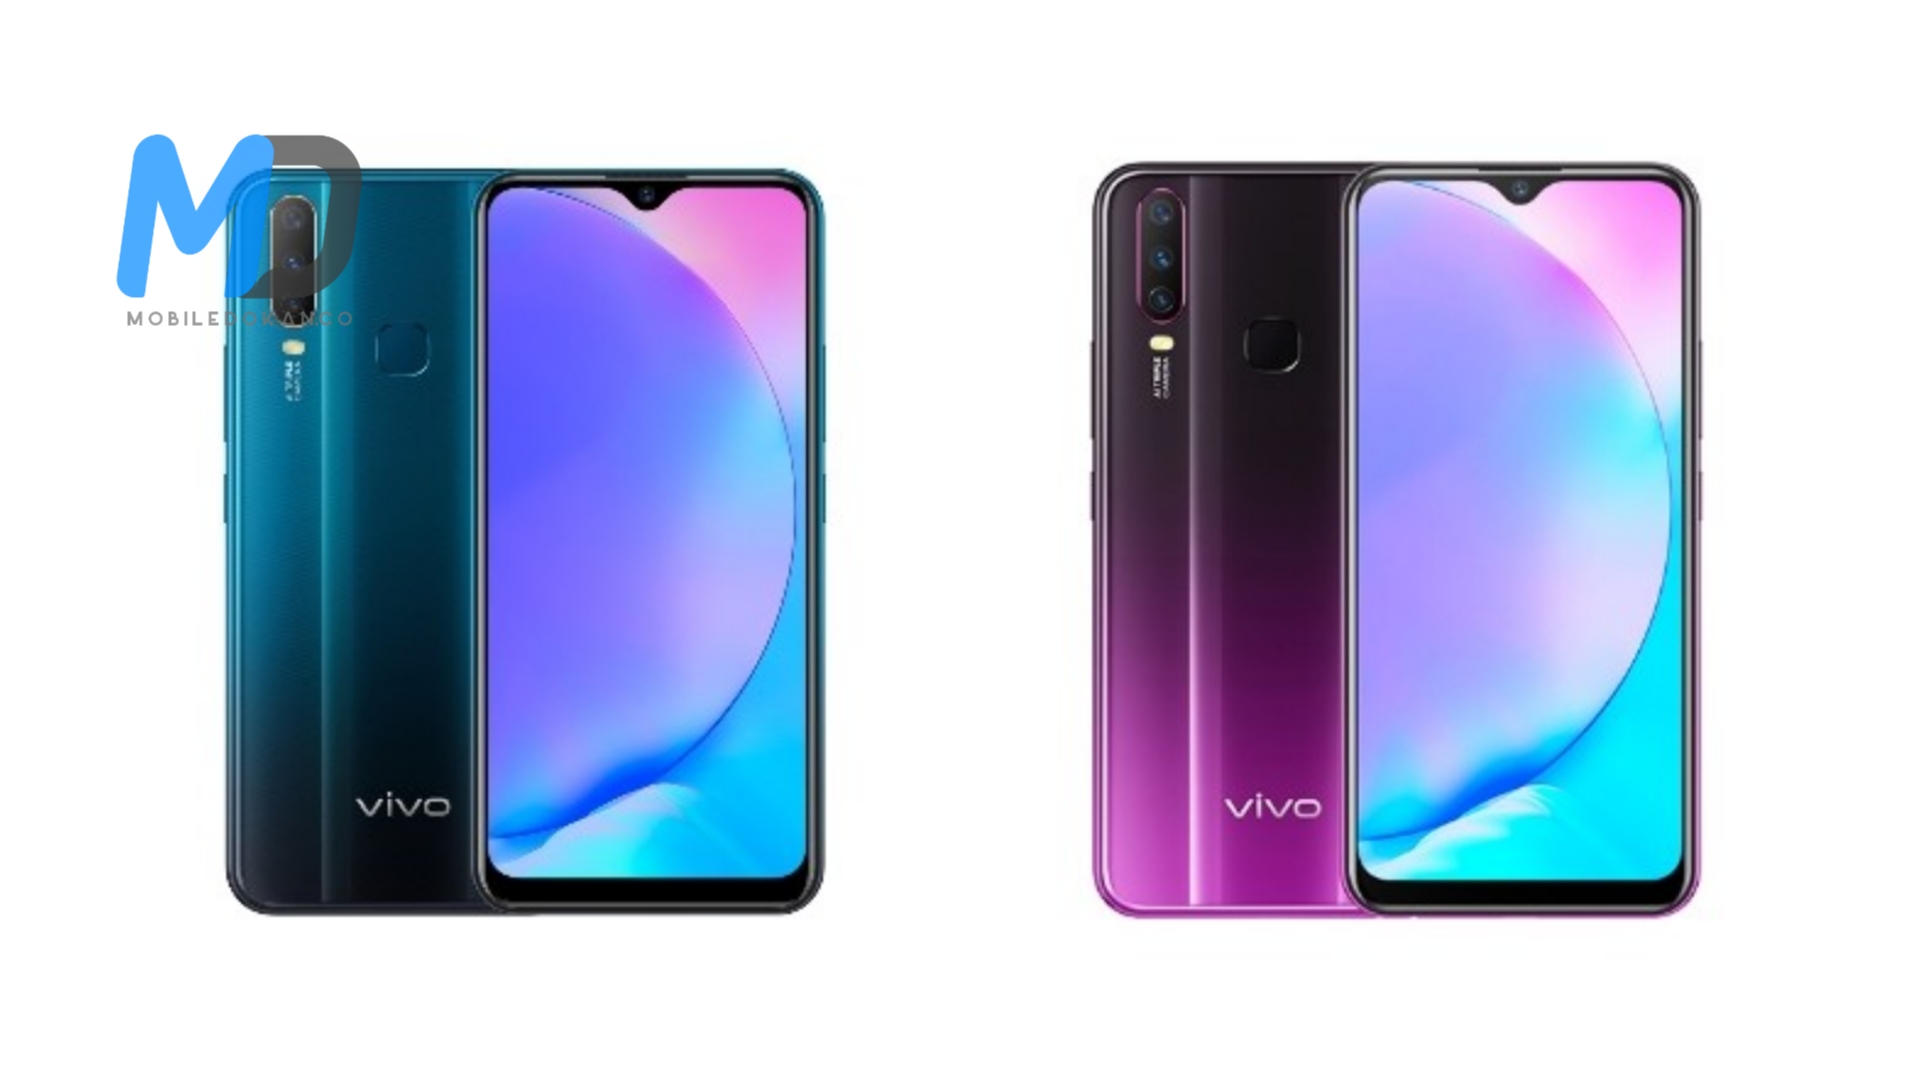 Vivo Y17 update-got Android 11-based new Funtouch OS 11 update